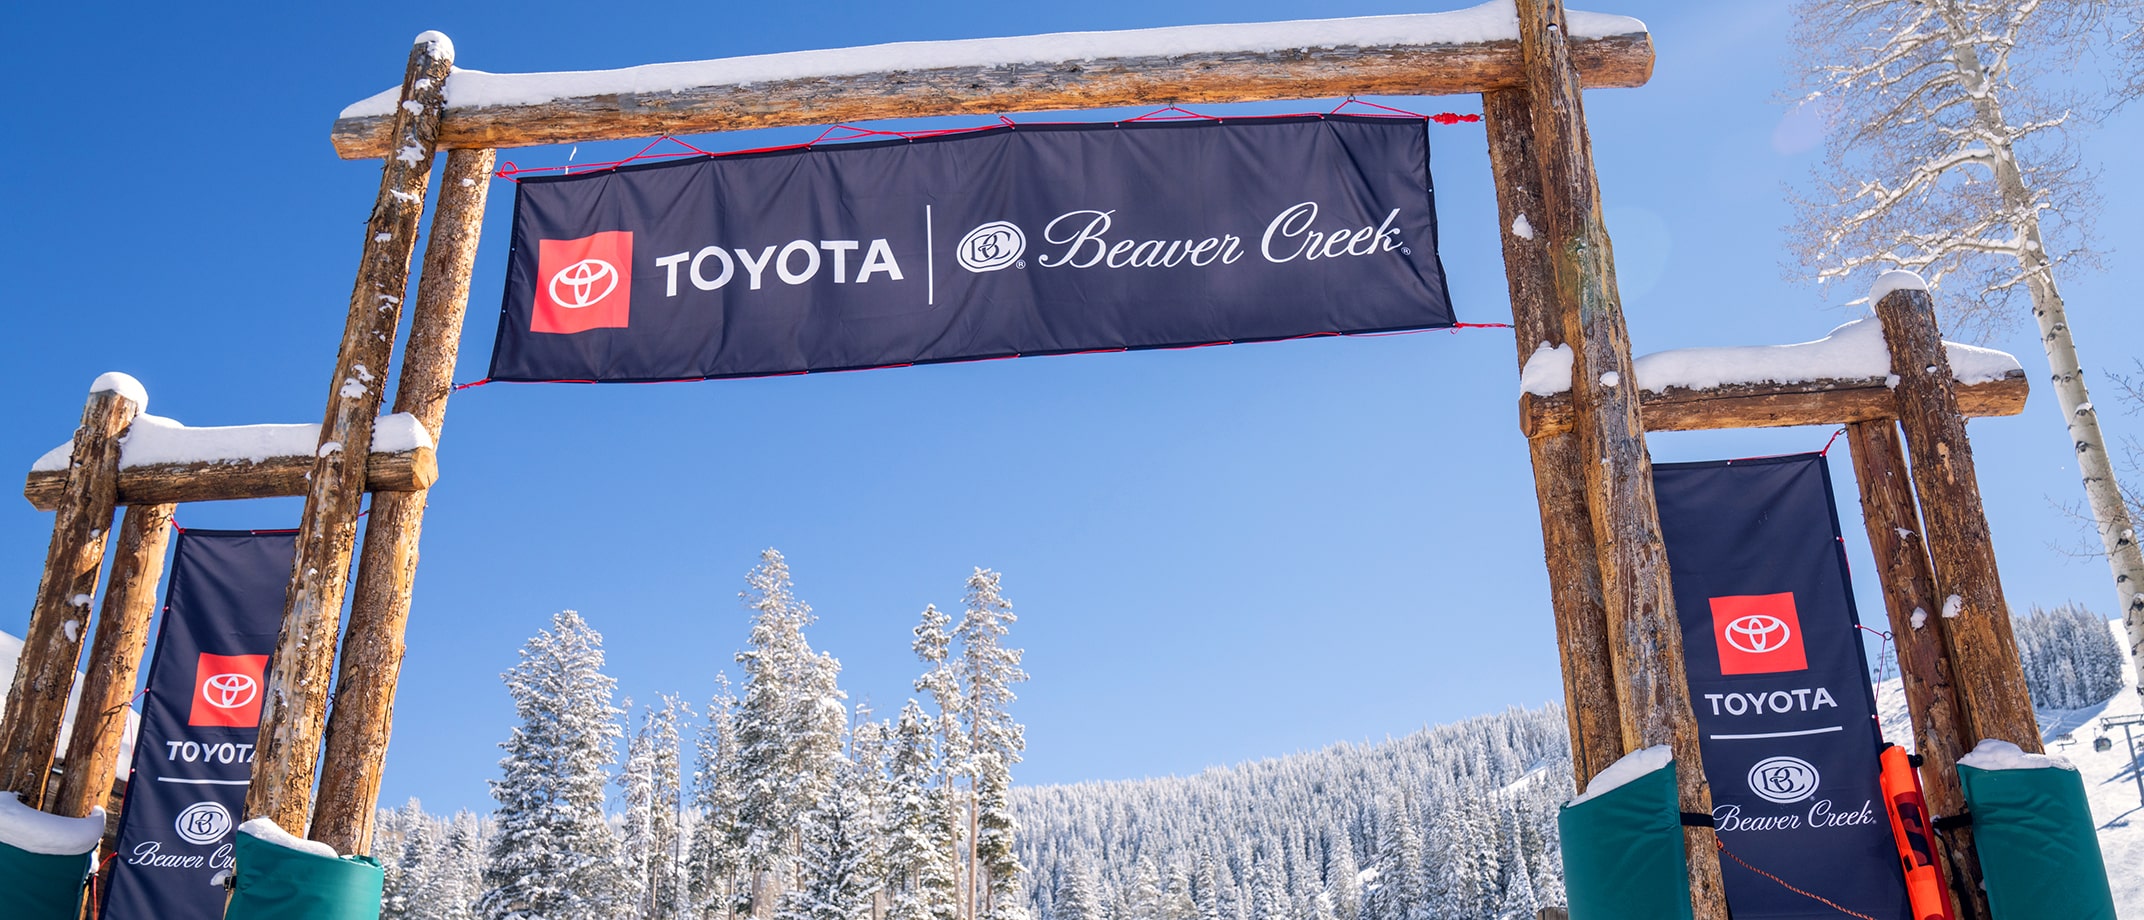 Three banner ads with a lockup of the Toyota logo and Beaver Creek resort’s logo hang on display at the entrance of a ski resort.